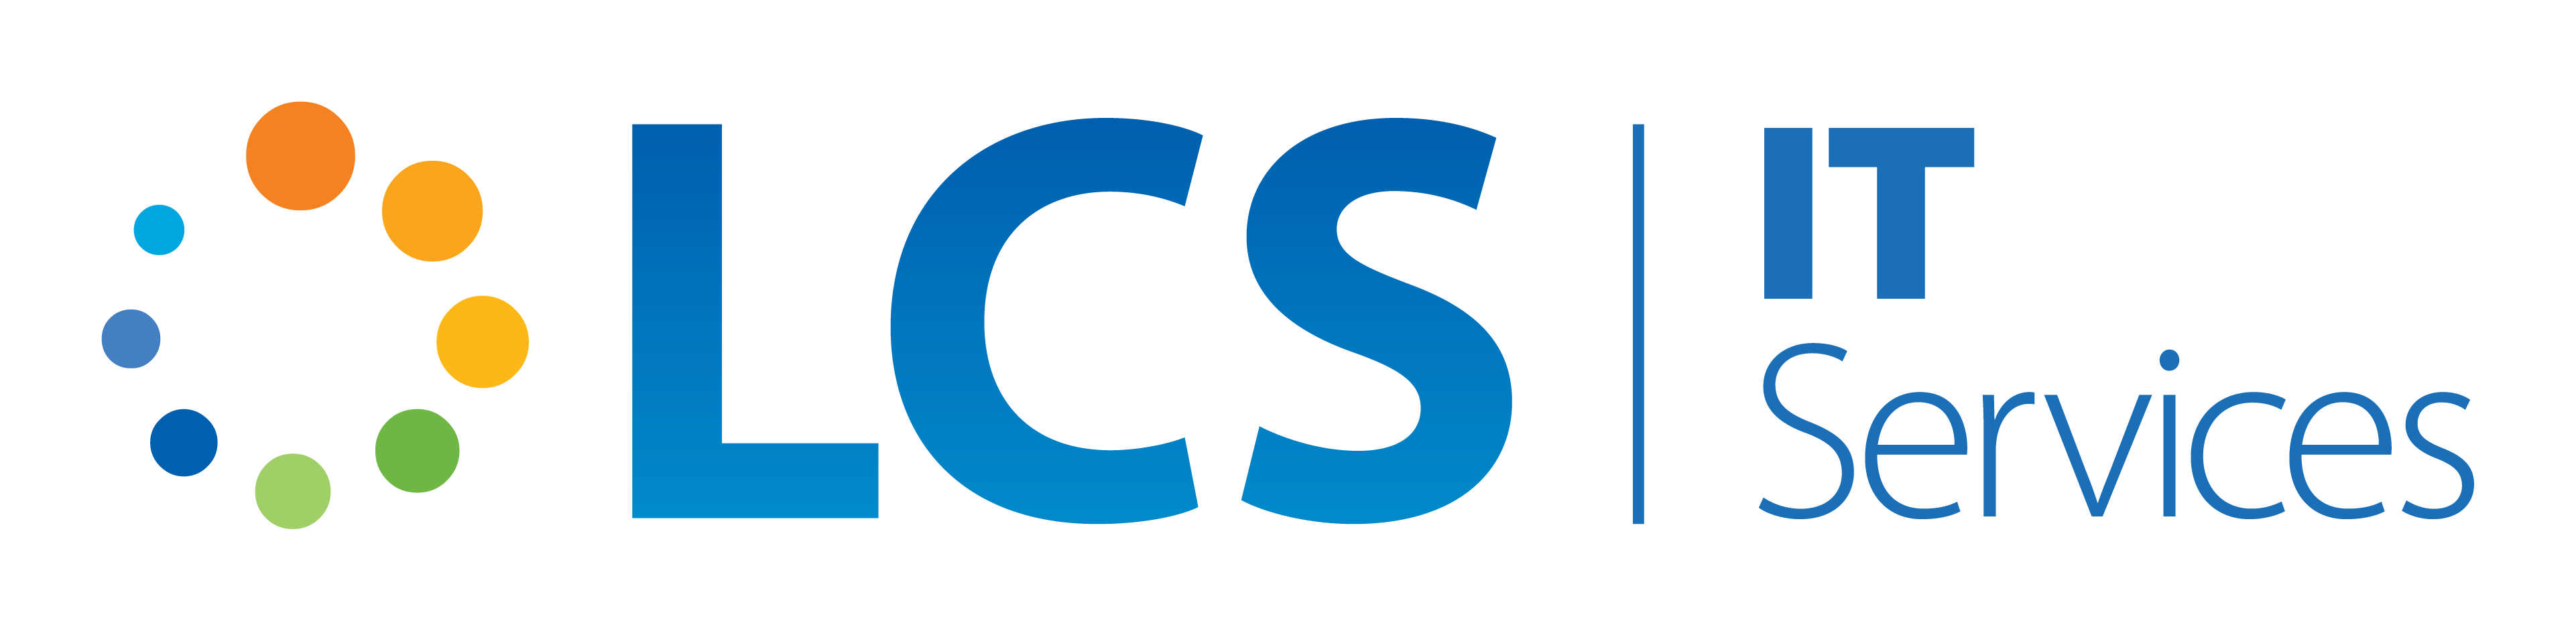 LCS It Services logo